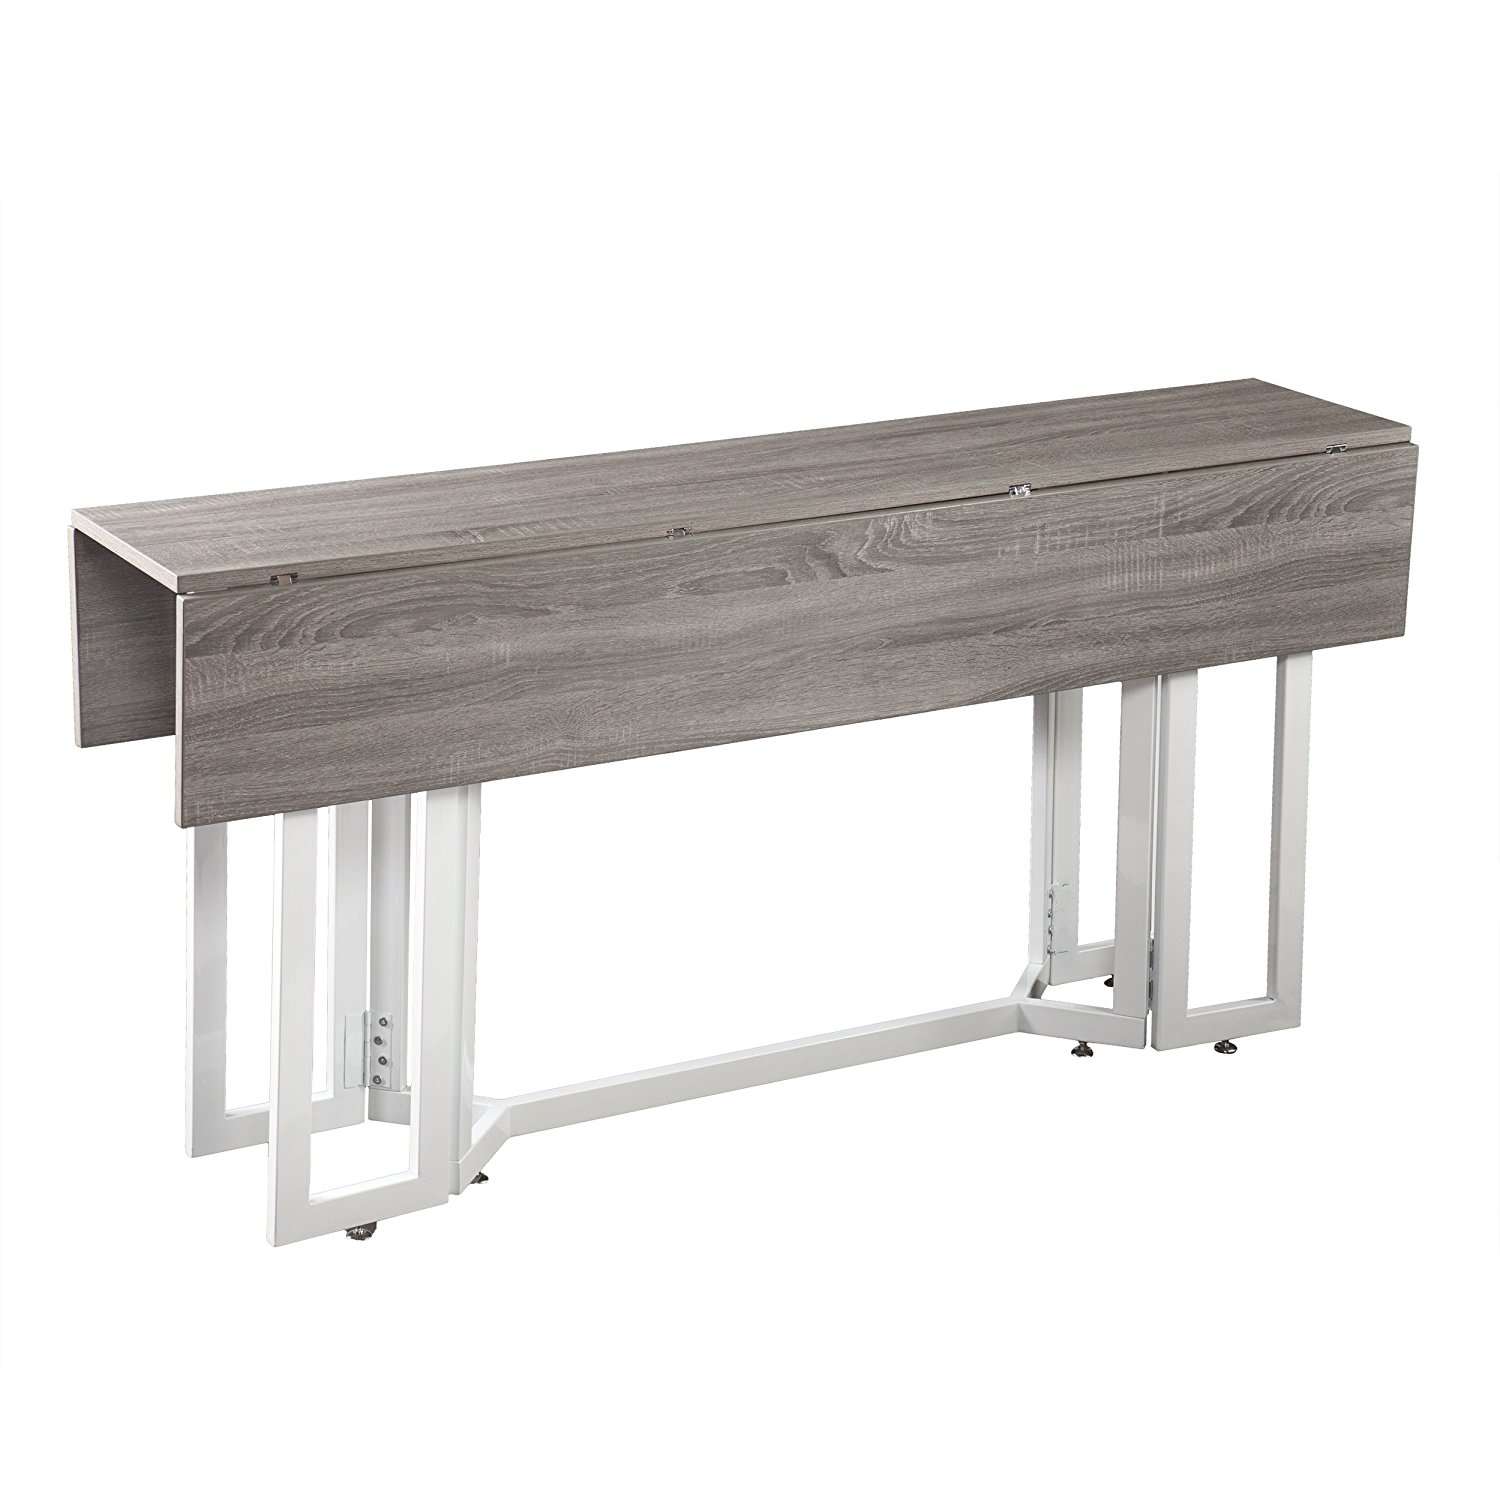 Holly & Martin Driness Drop Leaf Console Dining Table, Weathered Gray Finish with White Metal Base